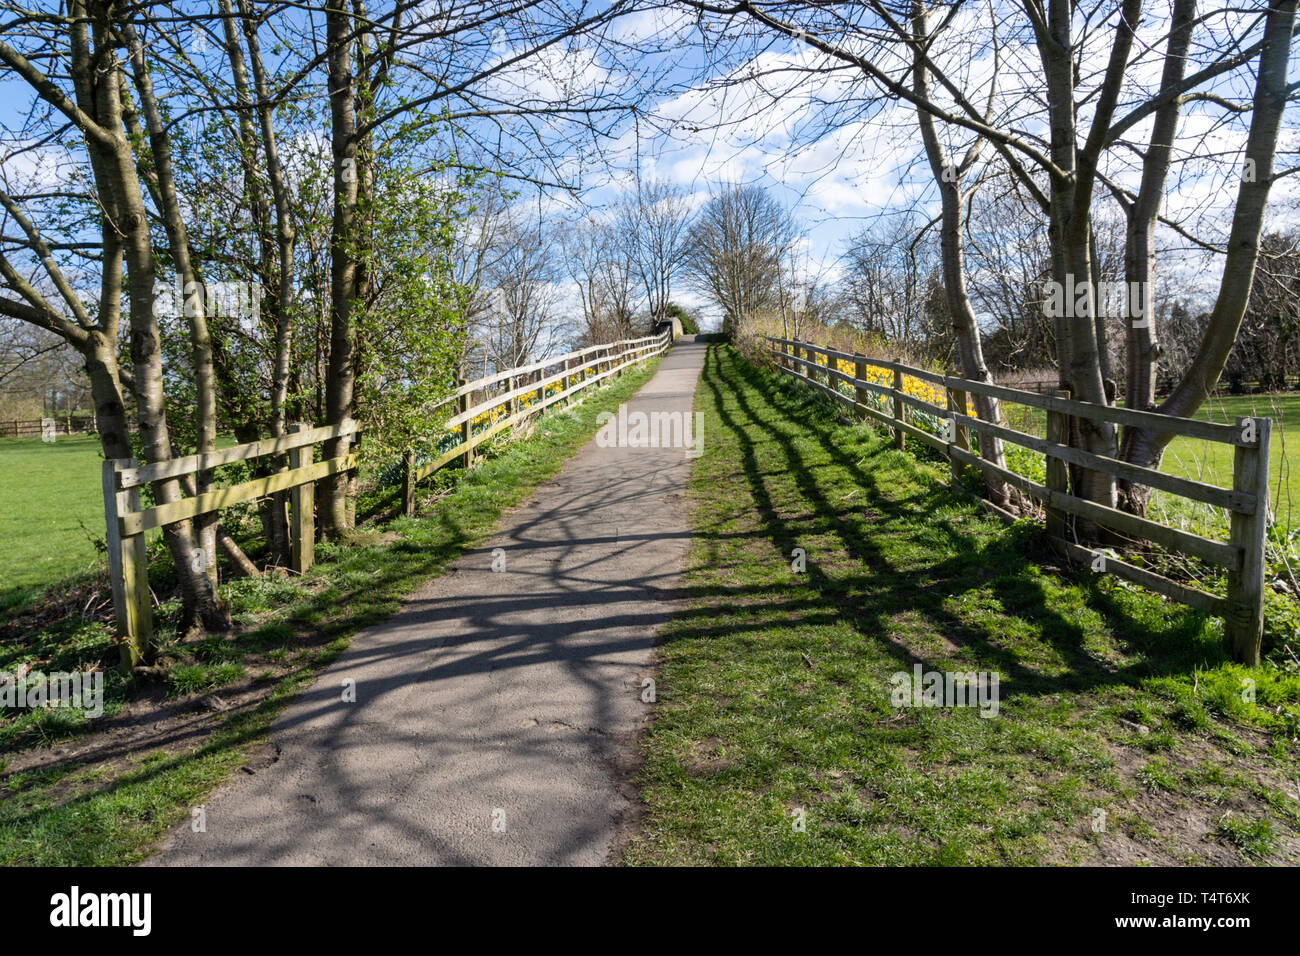 Towards a railway bridge, there is a tarmac path lined with wooden fences and trees, Harrogate, North Yorkshire, England, UK. Stock Photo